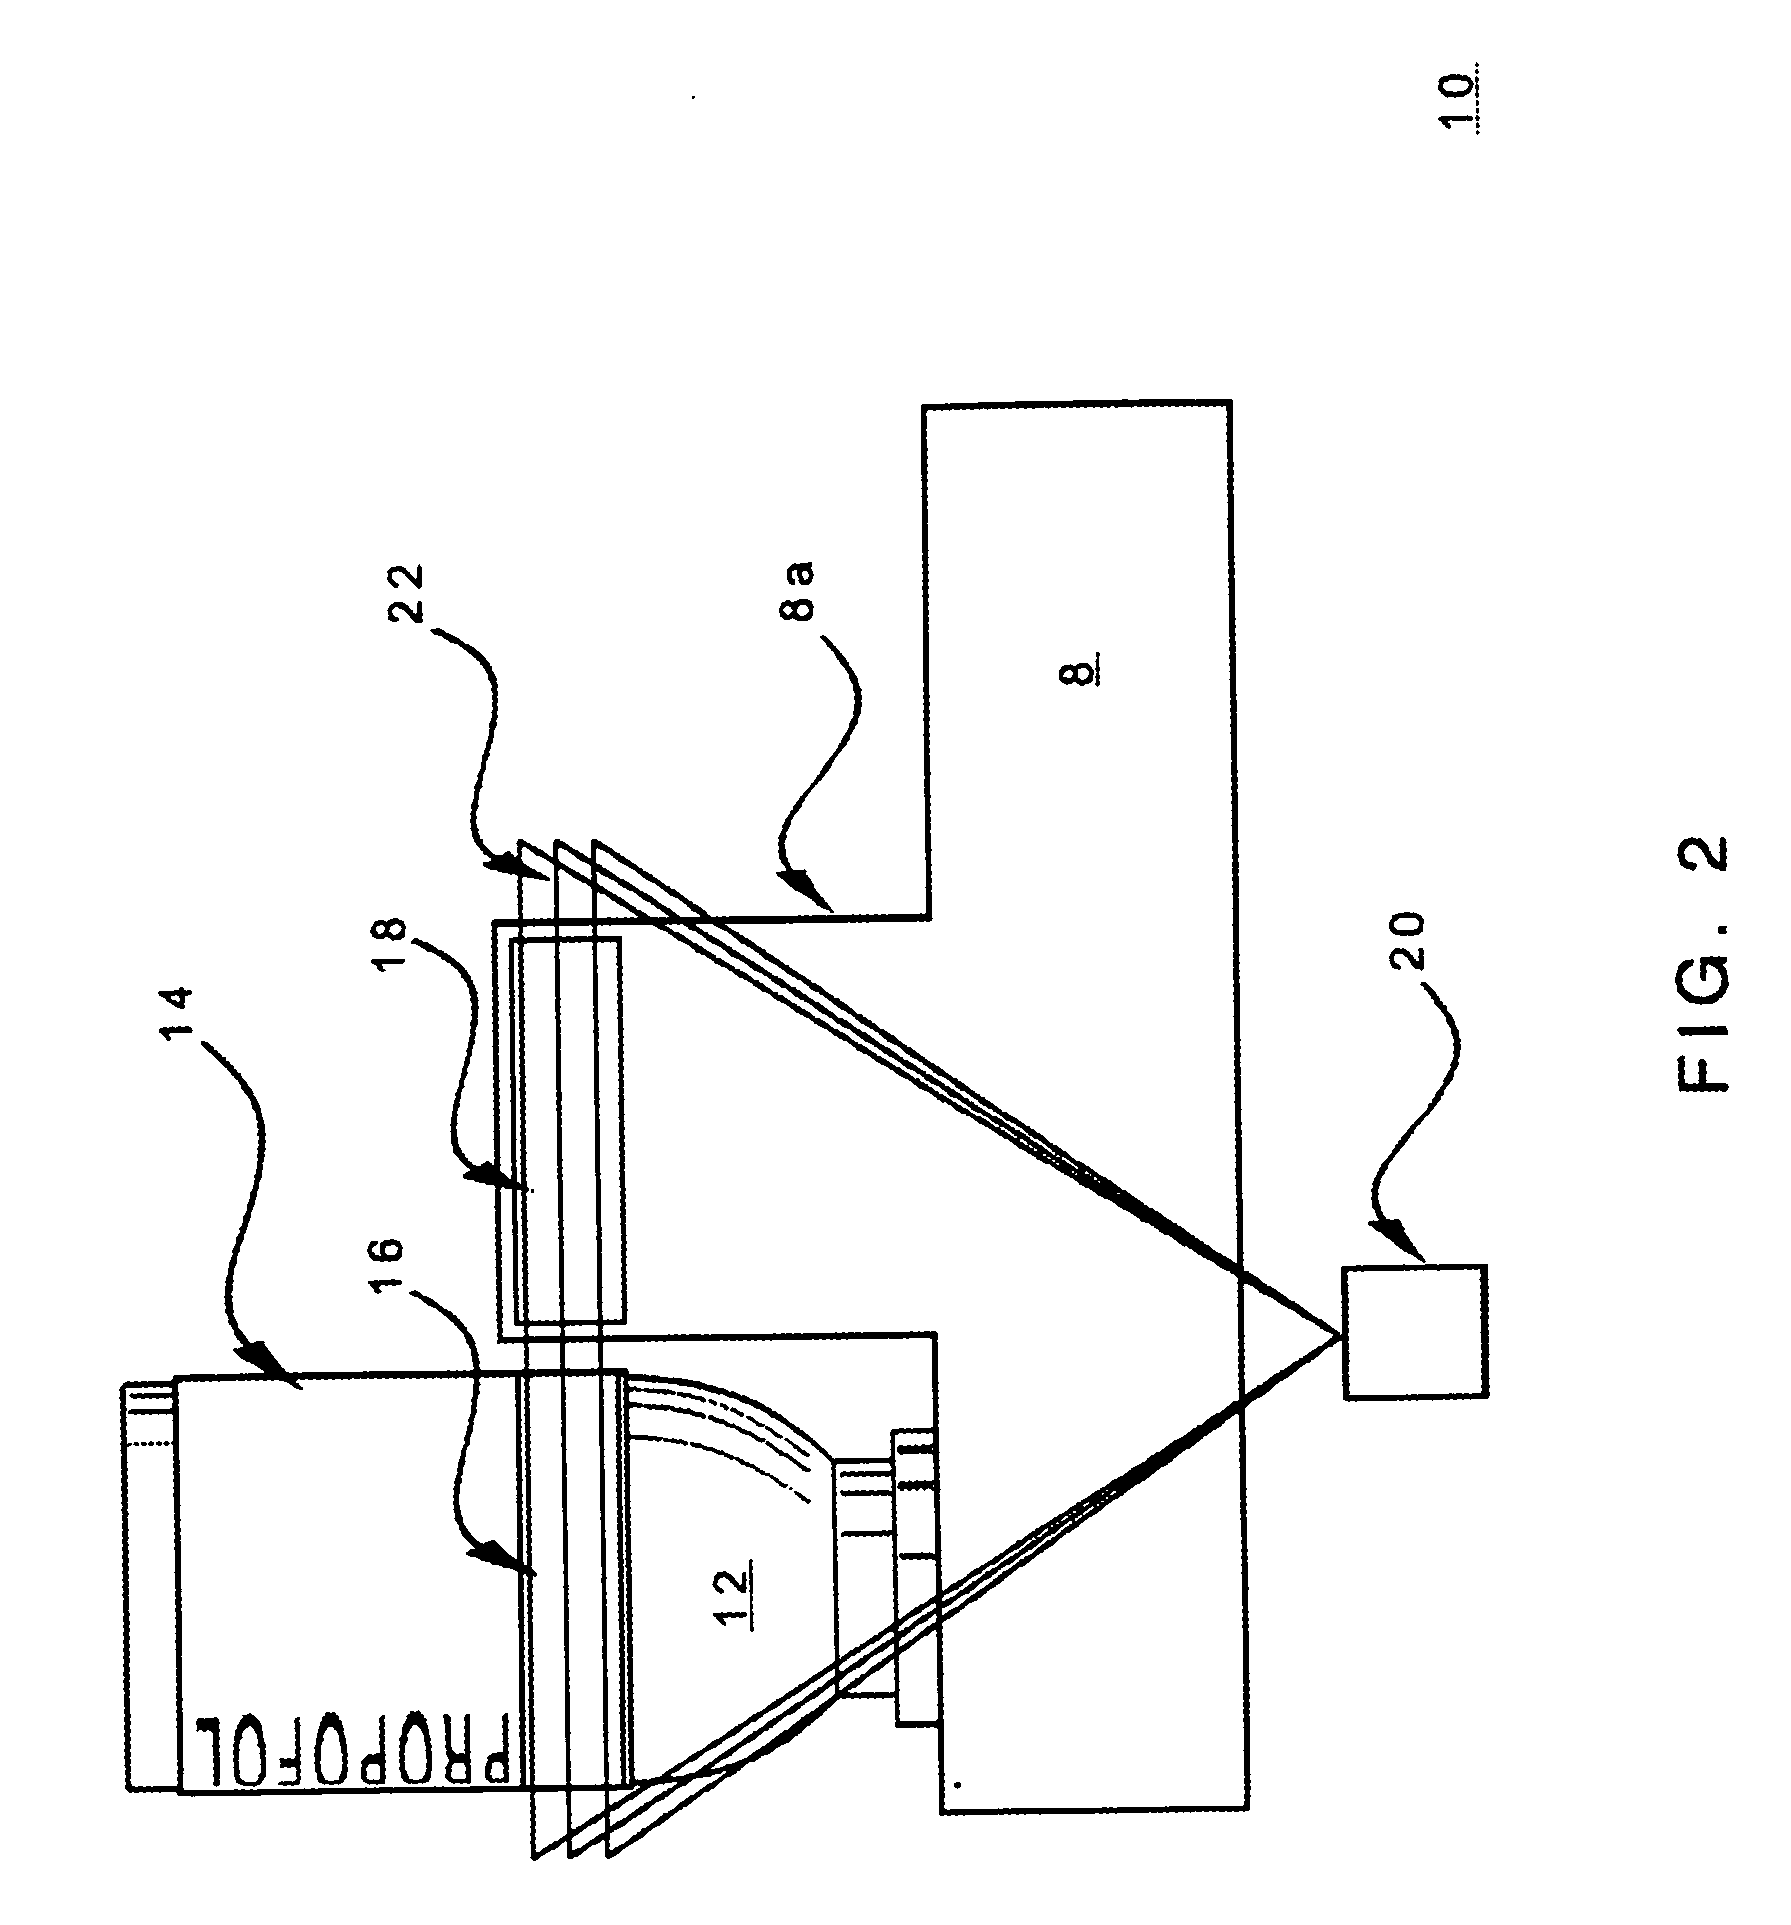 Methods and apparatuses for assuring quality and safety of drug administration and medical products and kits